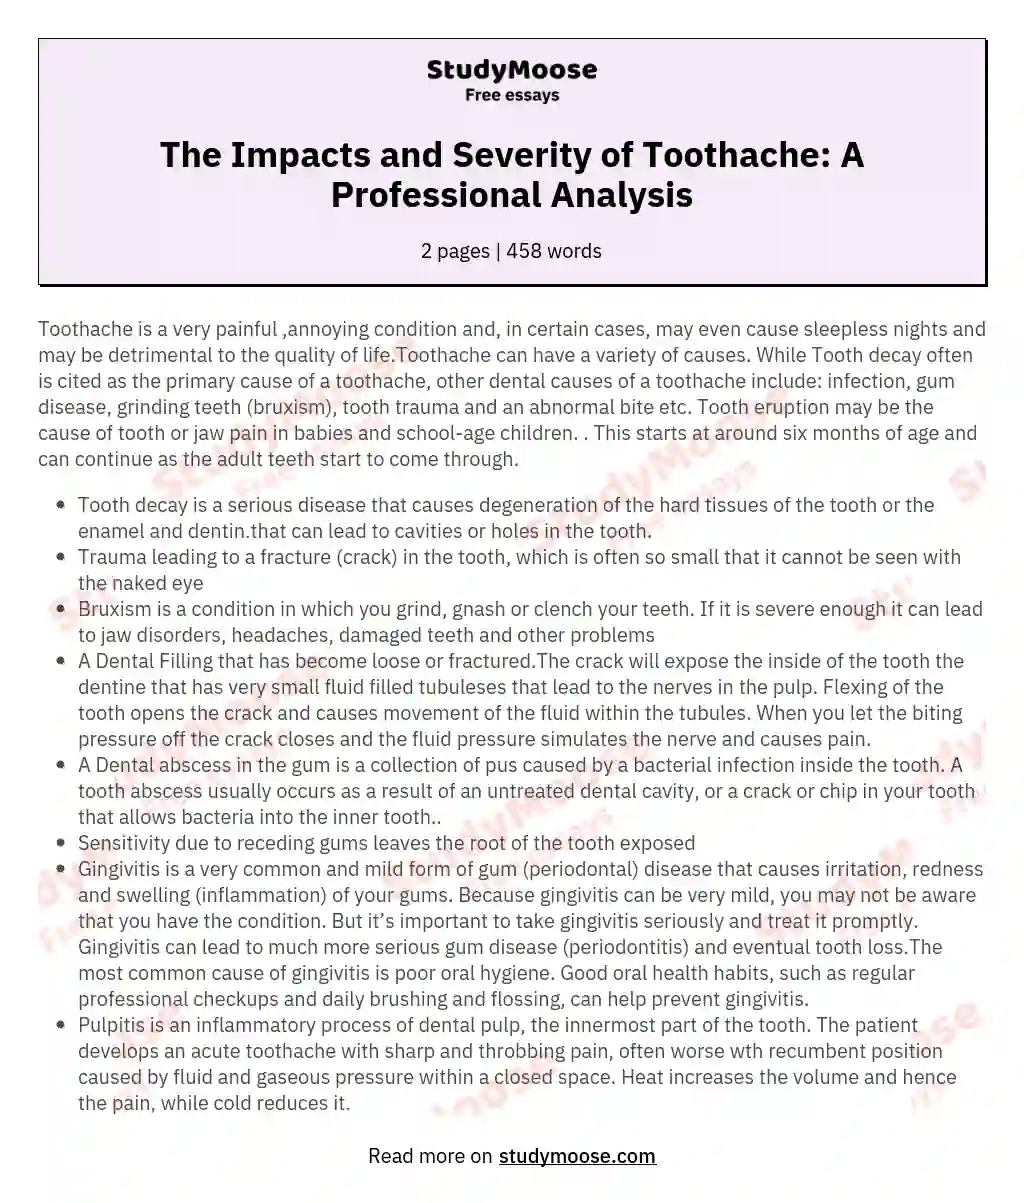 The Impacts and Severity of Toothache: A Professional Analysis essay